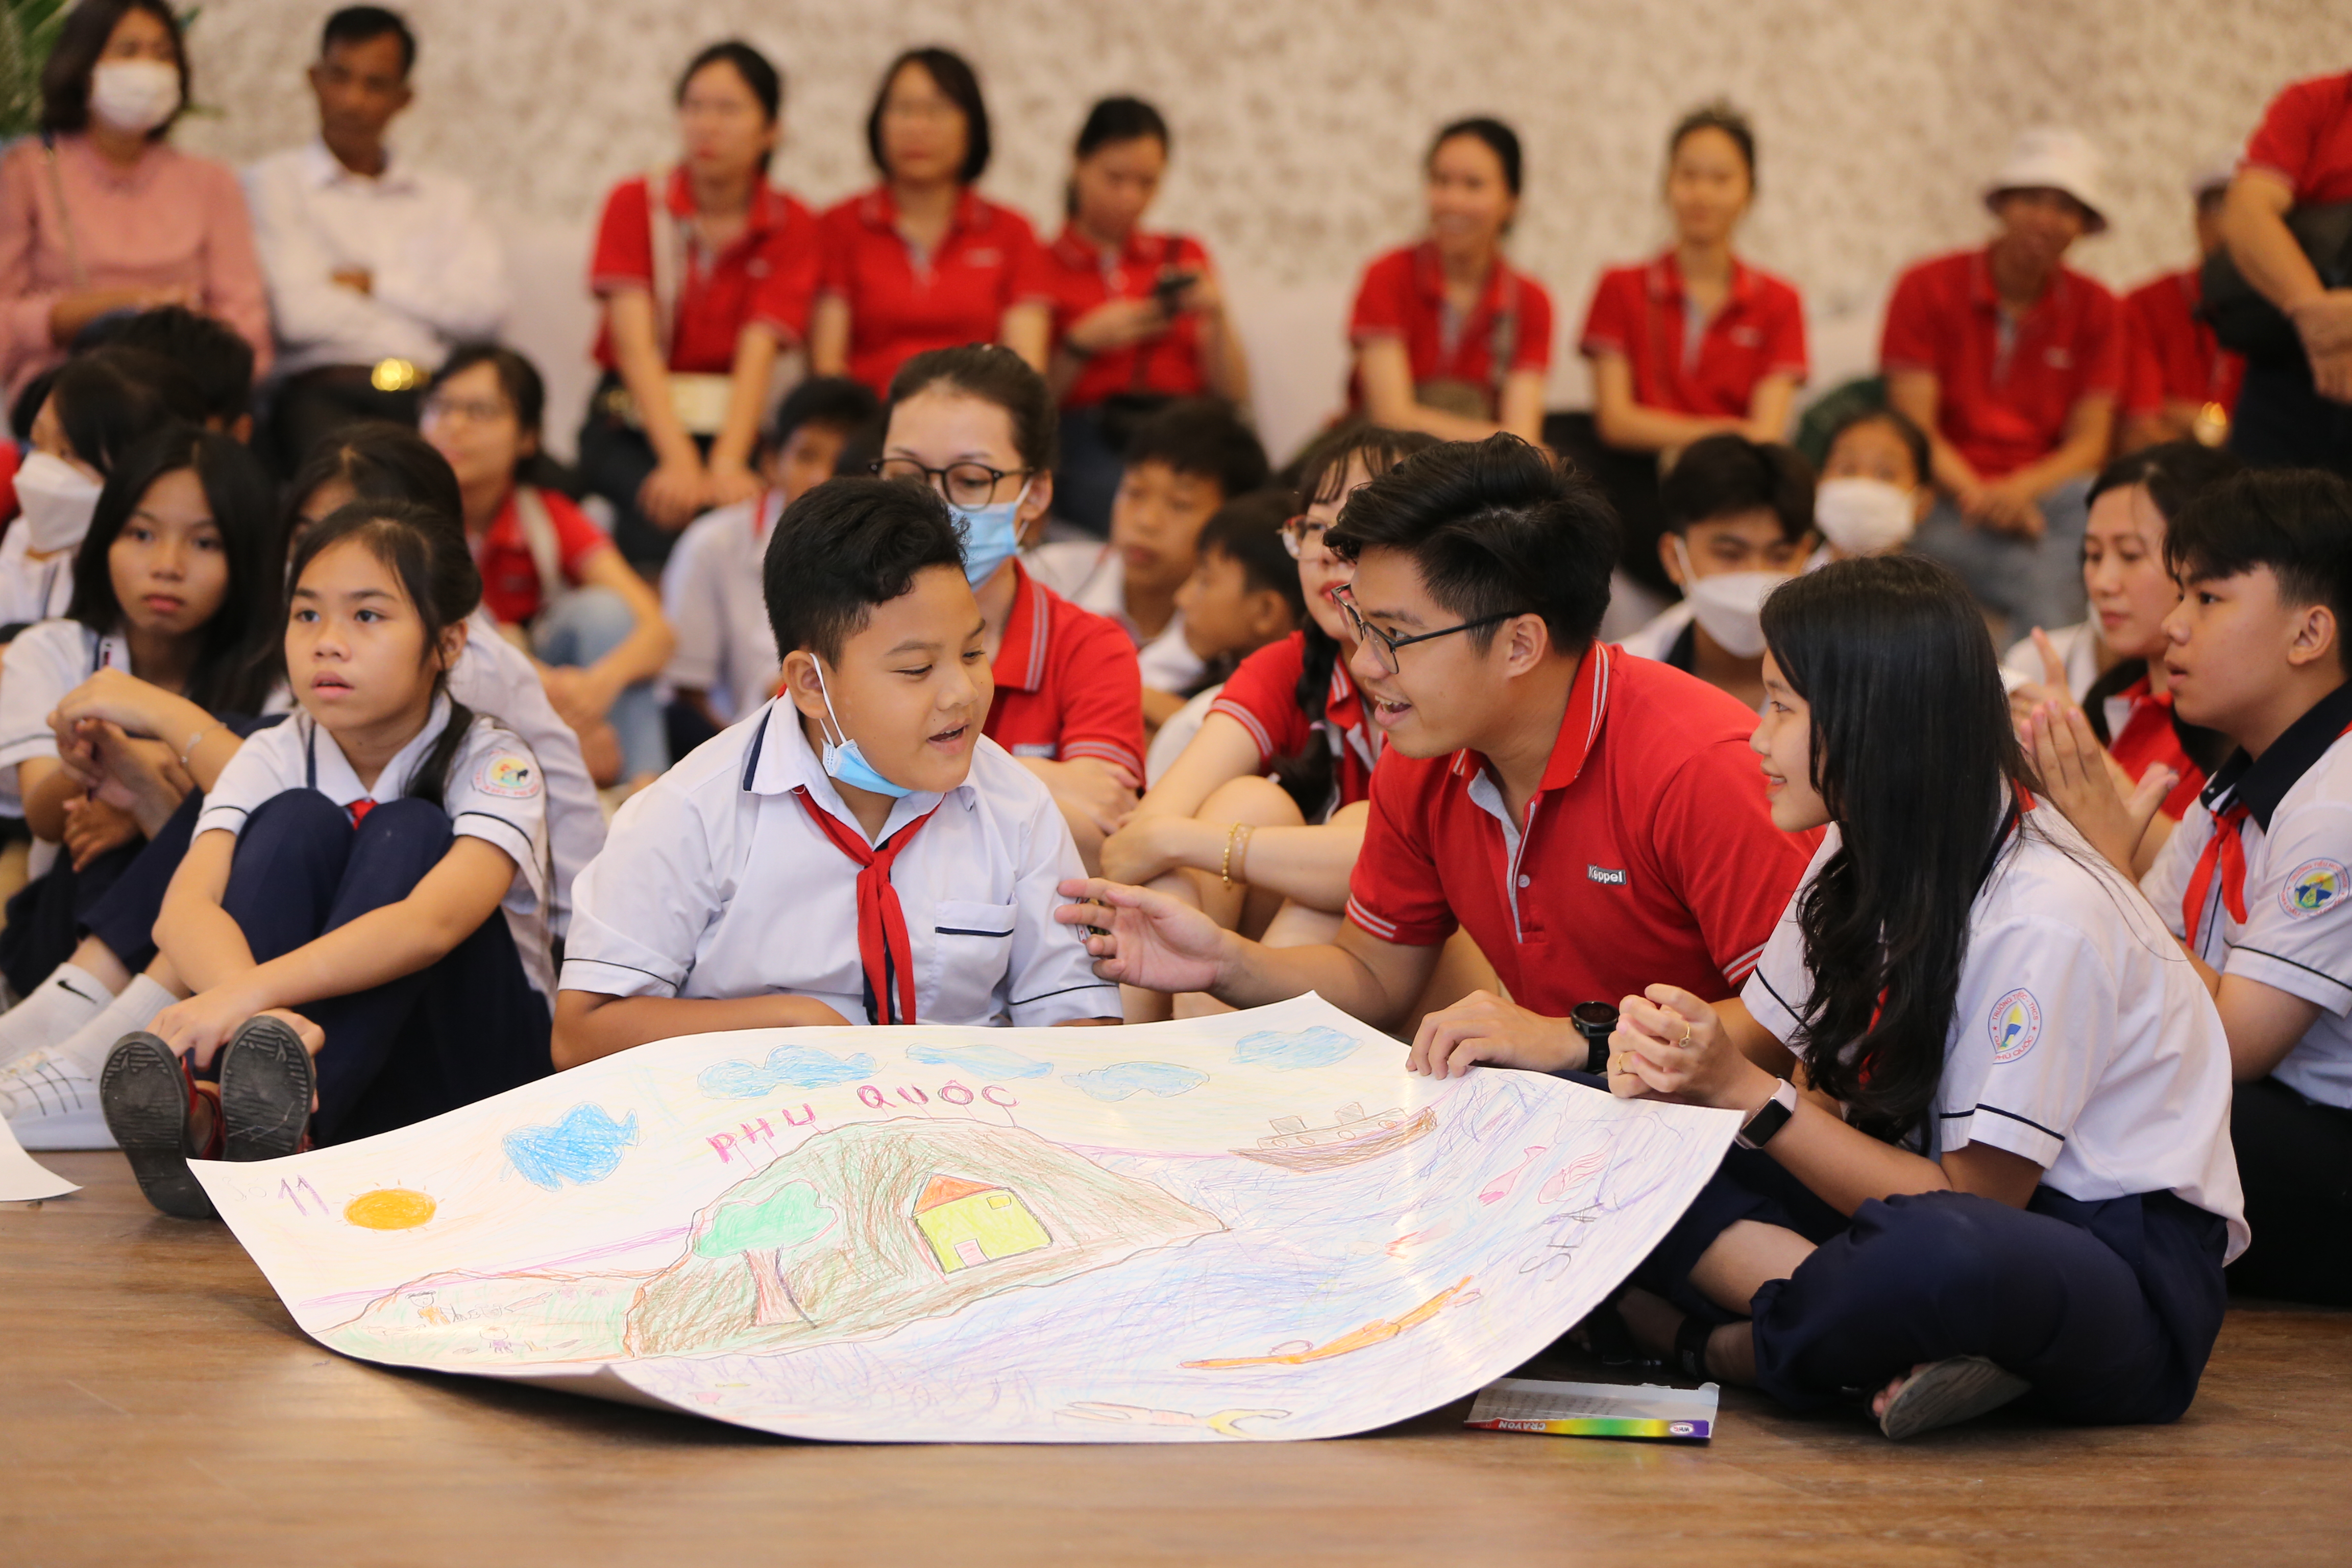 Keppel Land volunteers interacting with the students of Ganh Dau Primary and Secondary School.